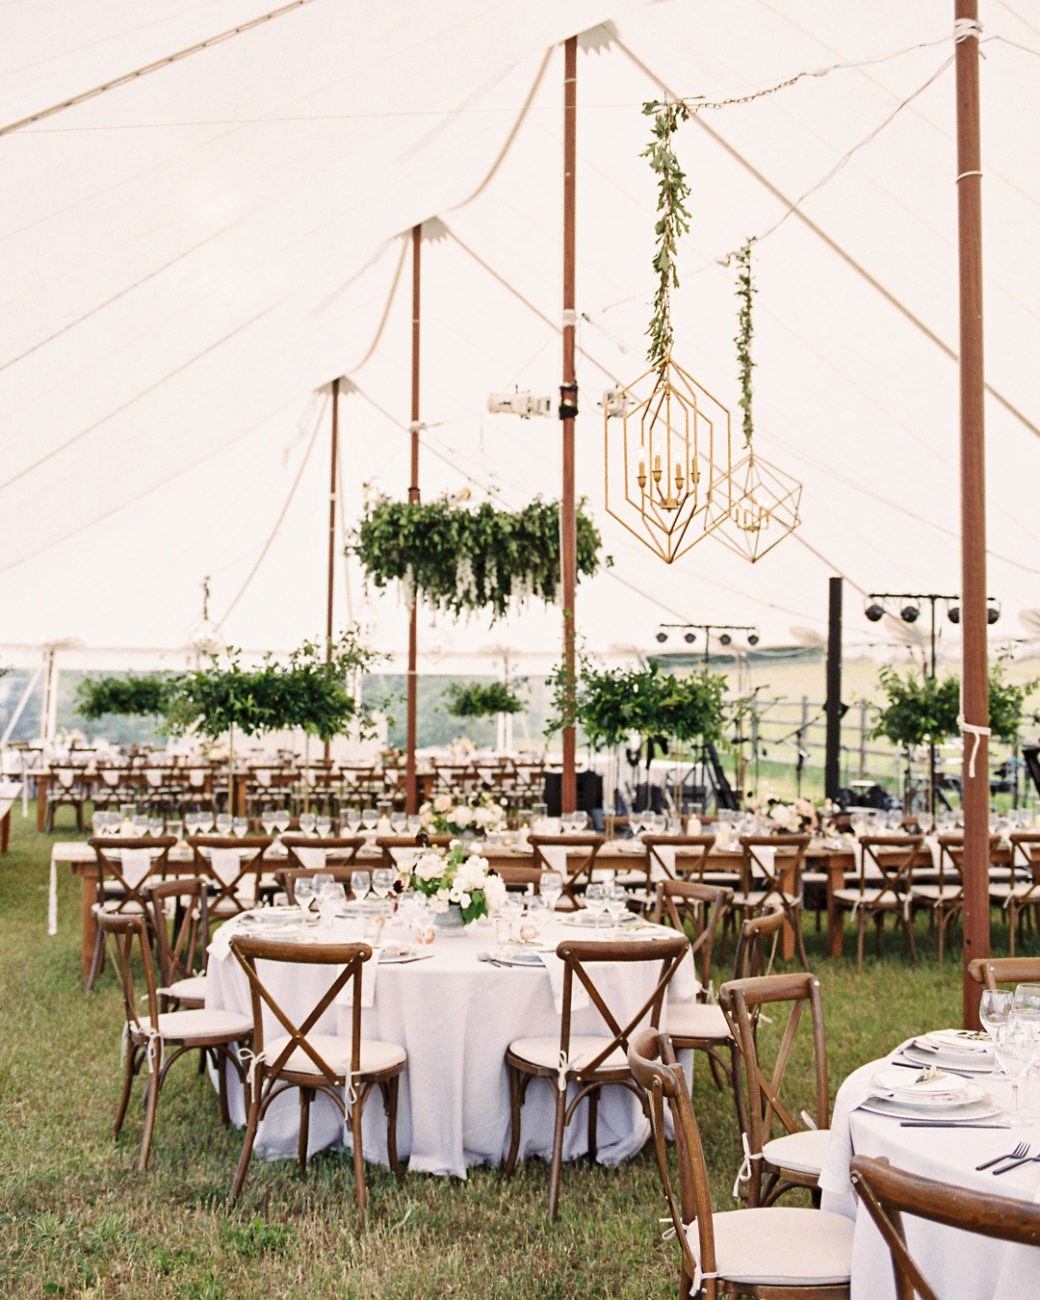 Open-Air Wedding Tents Are Beautiful and Elegant